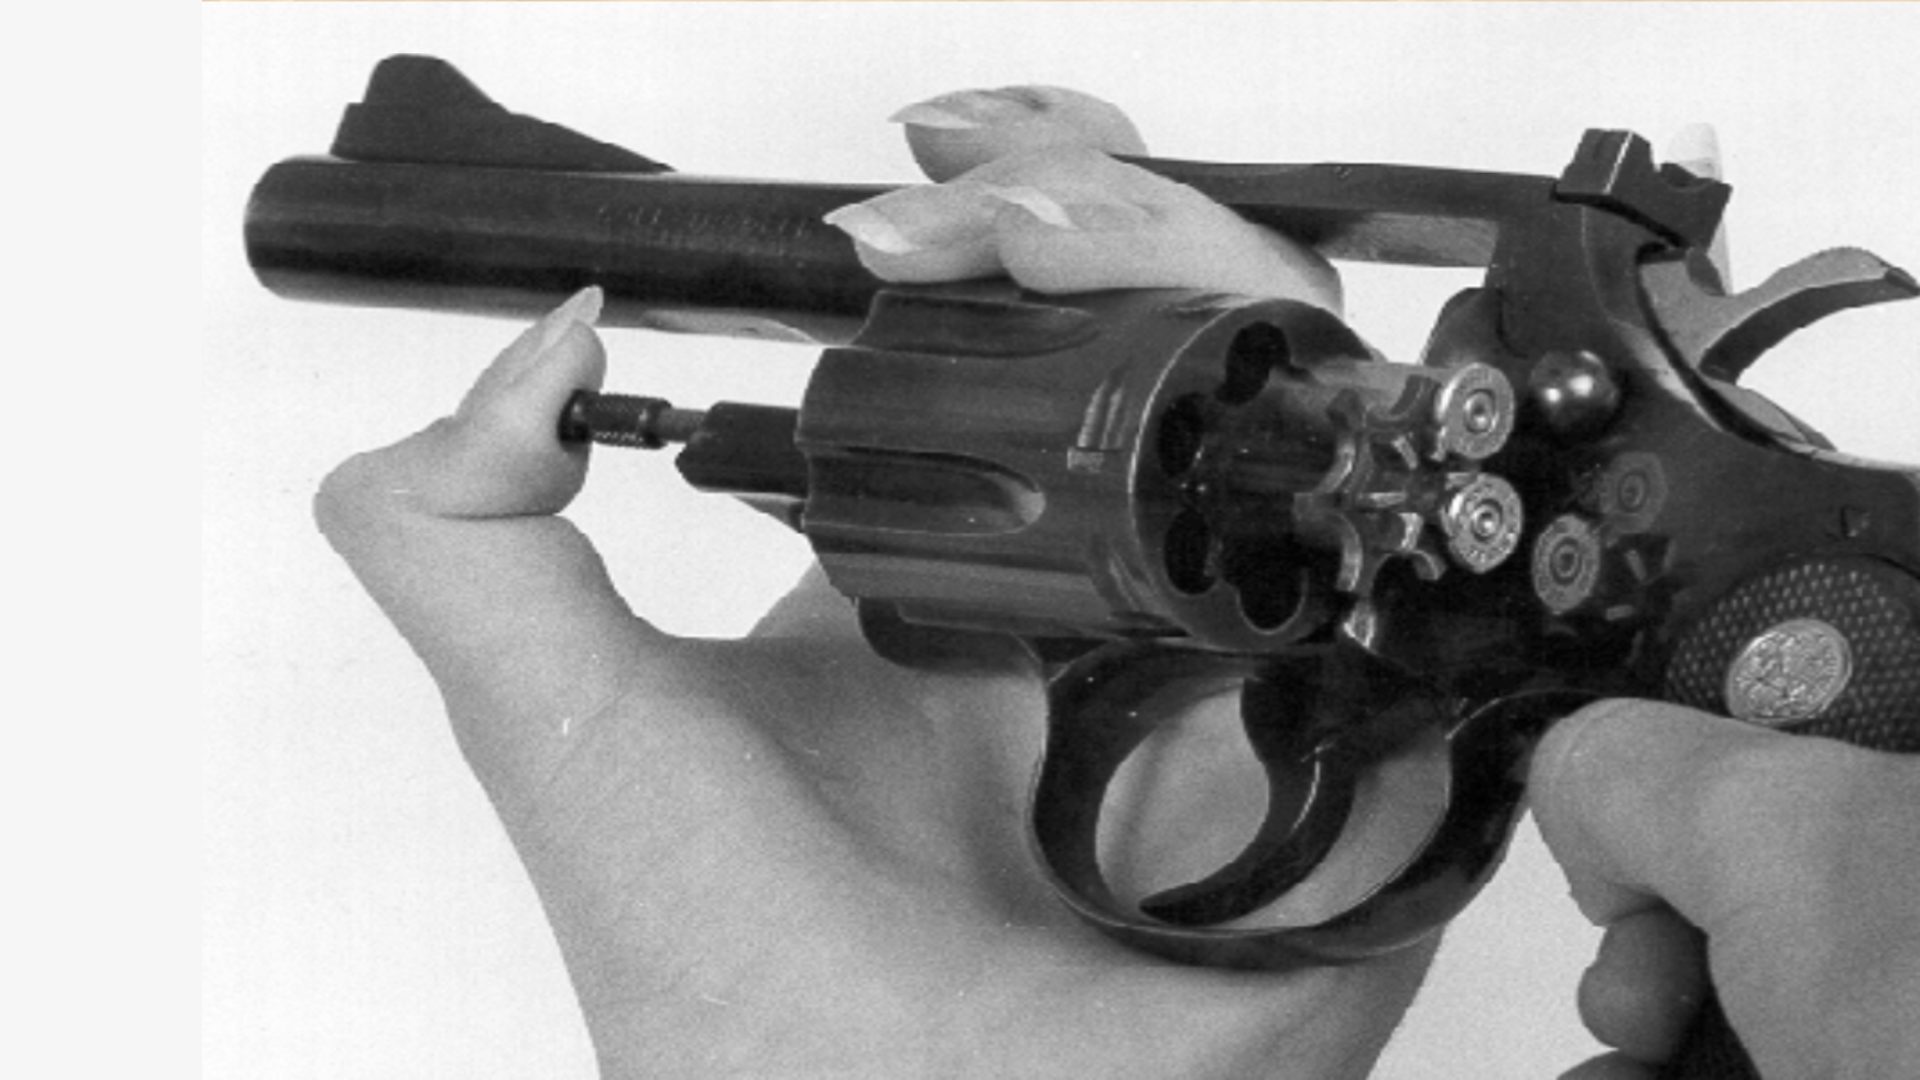 how to unload a revolver